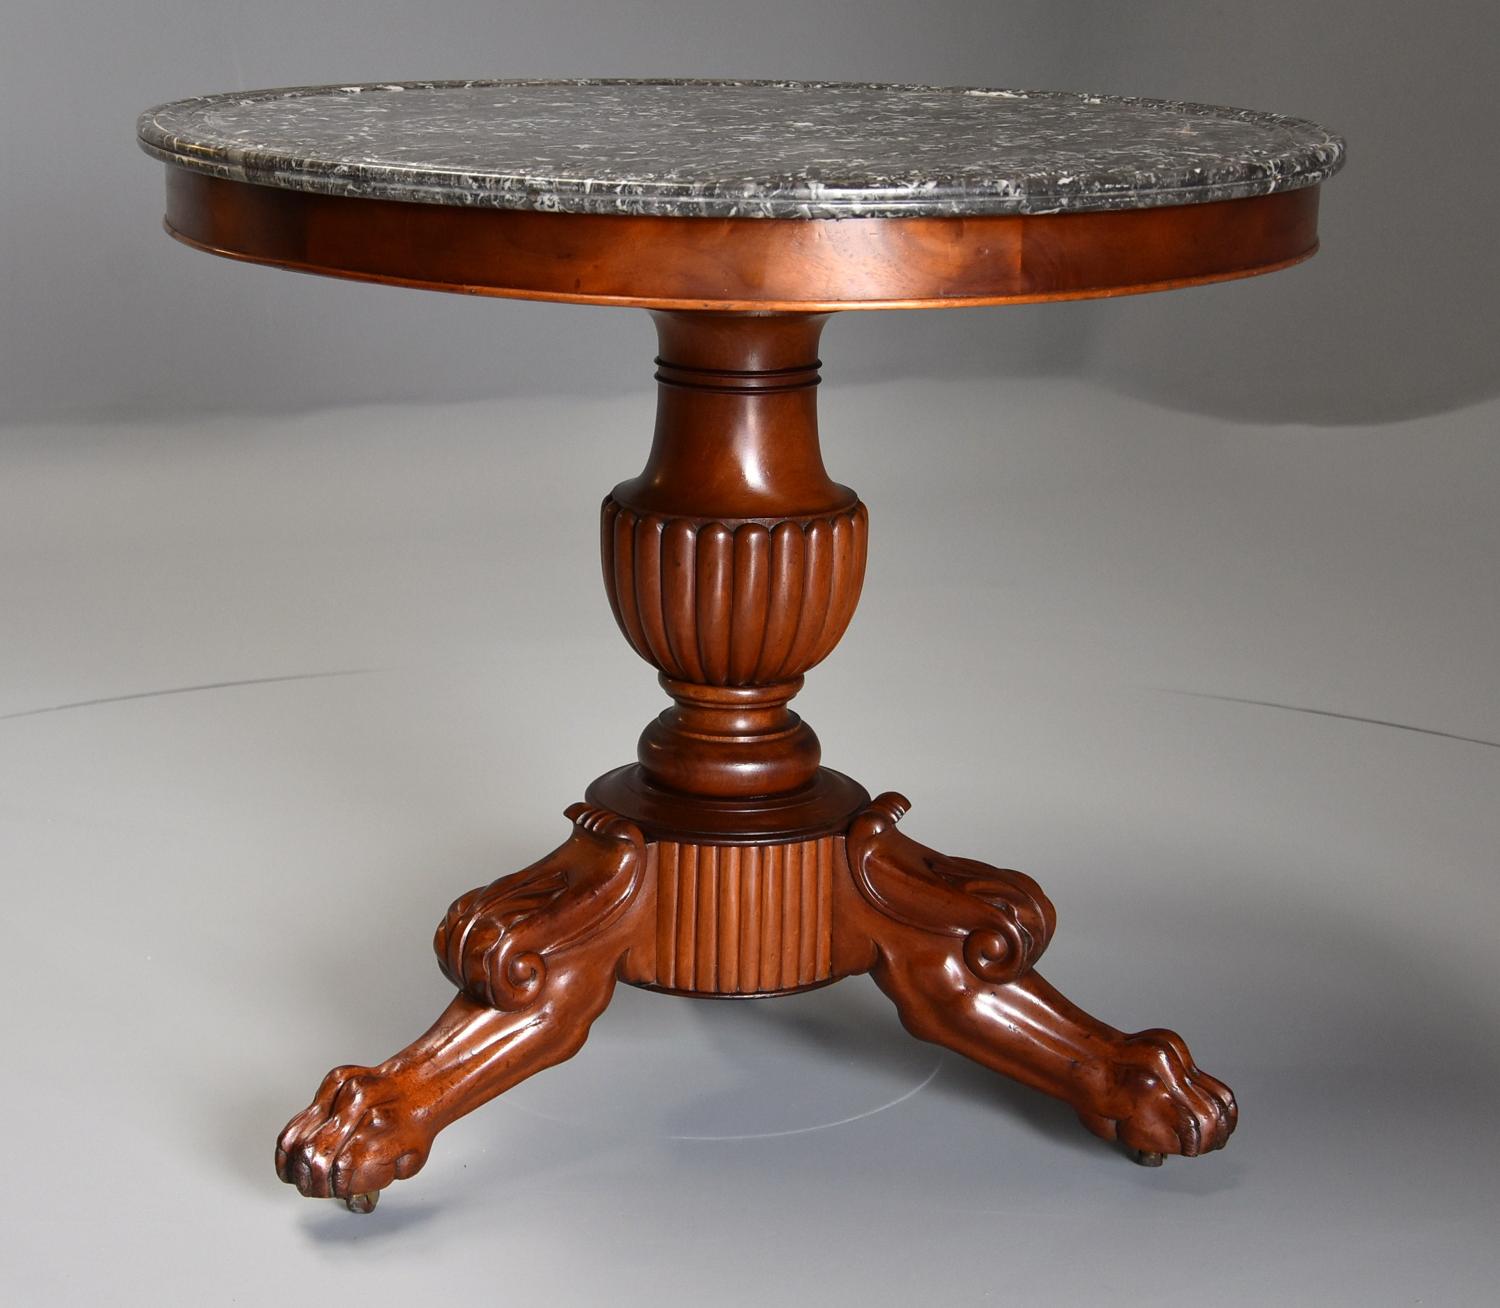 19th century French mahogany Gueridon table with original marble top